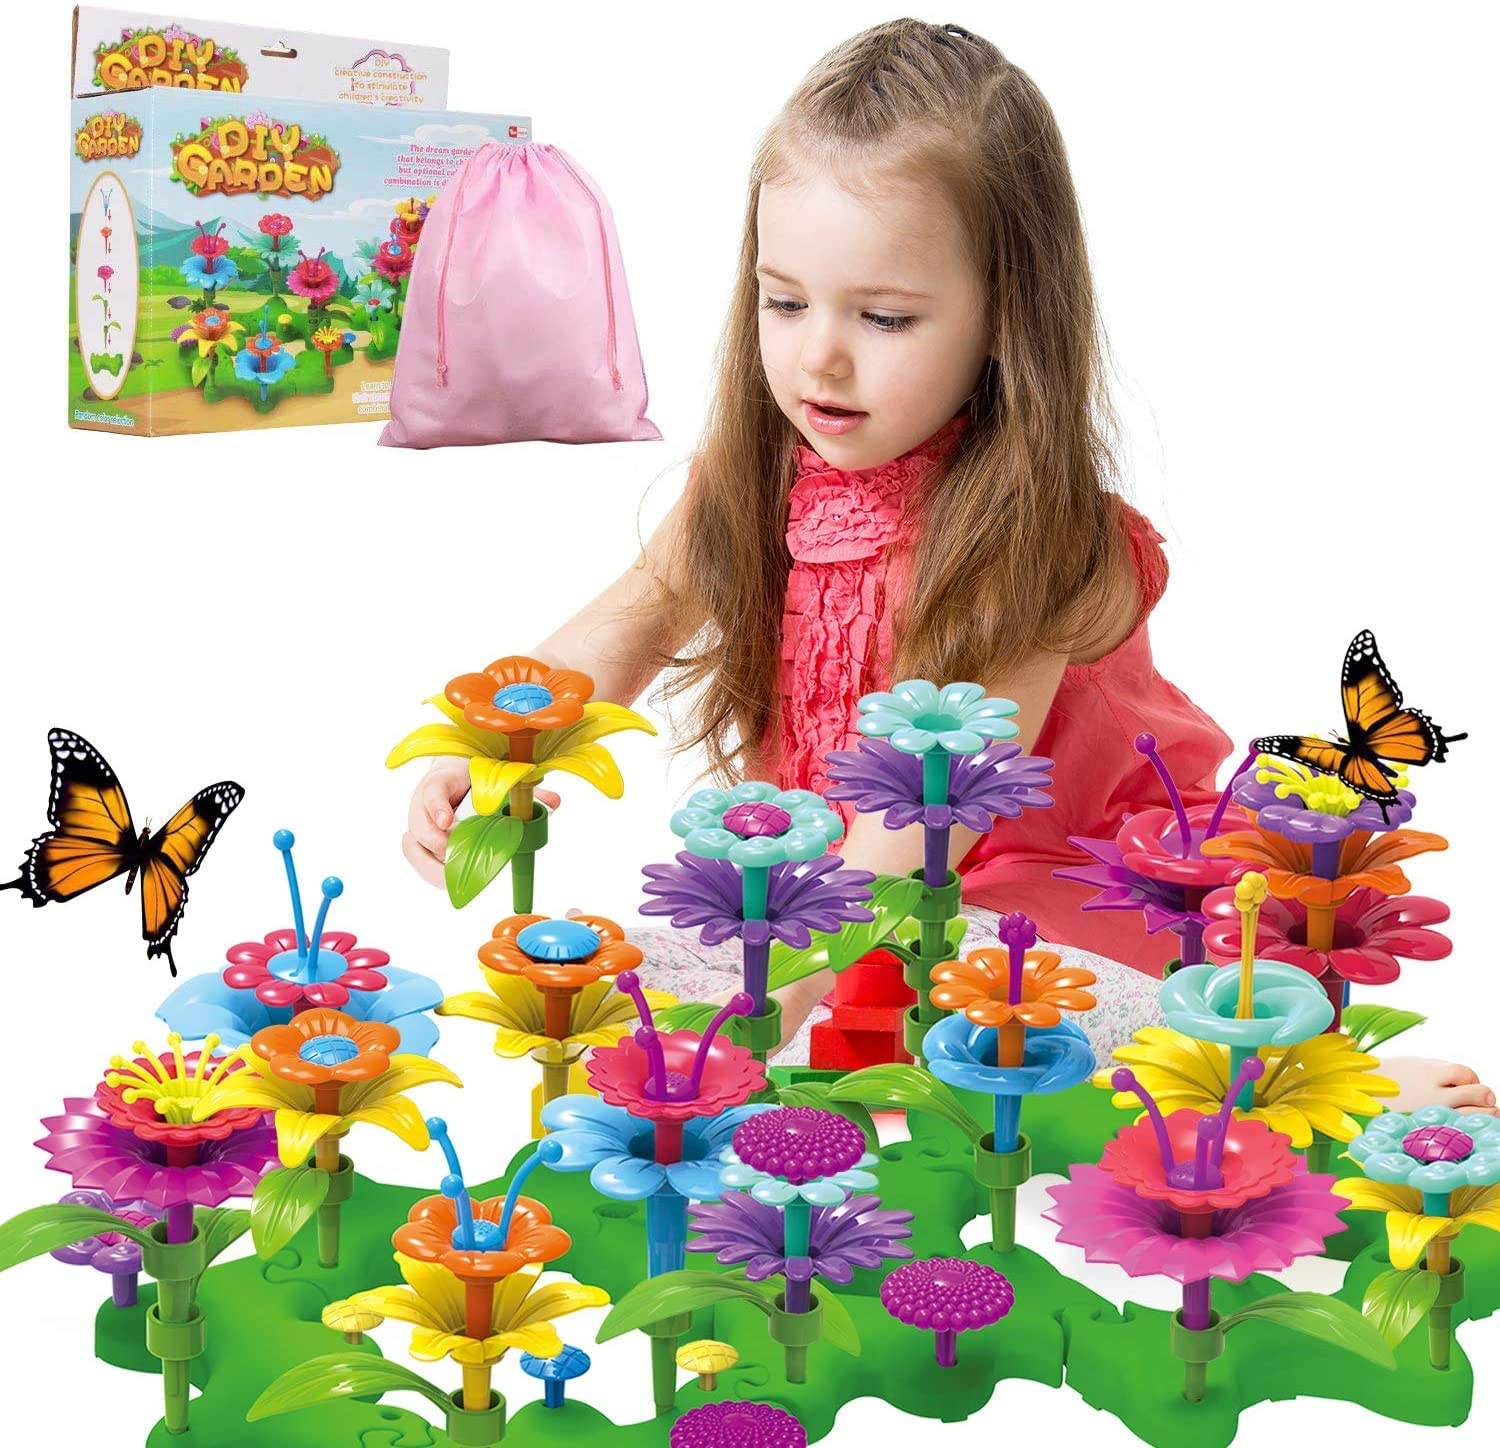 STEM Crafts and Build a Garden with Insects and Animals Birthday Gifts and Fine Motor Skills Toys for Kids Age 3 4 5 6 yr PREBOX Flower Building Toys Set for Toddler Girls 